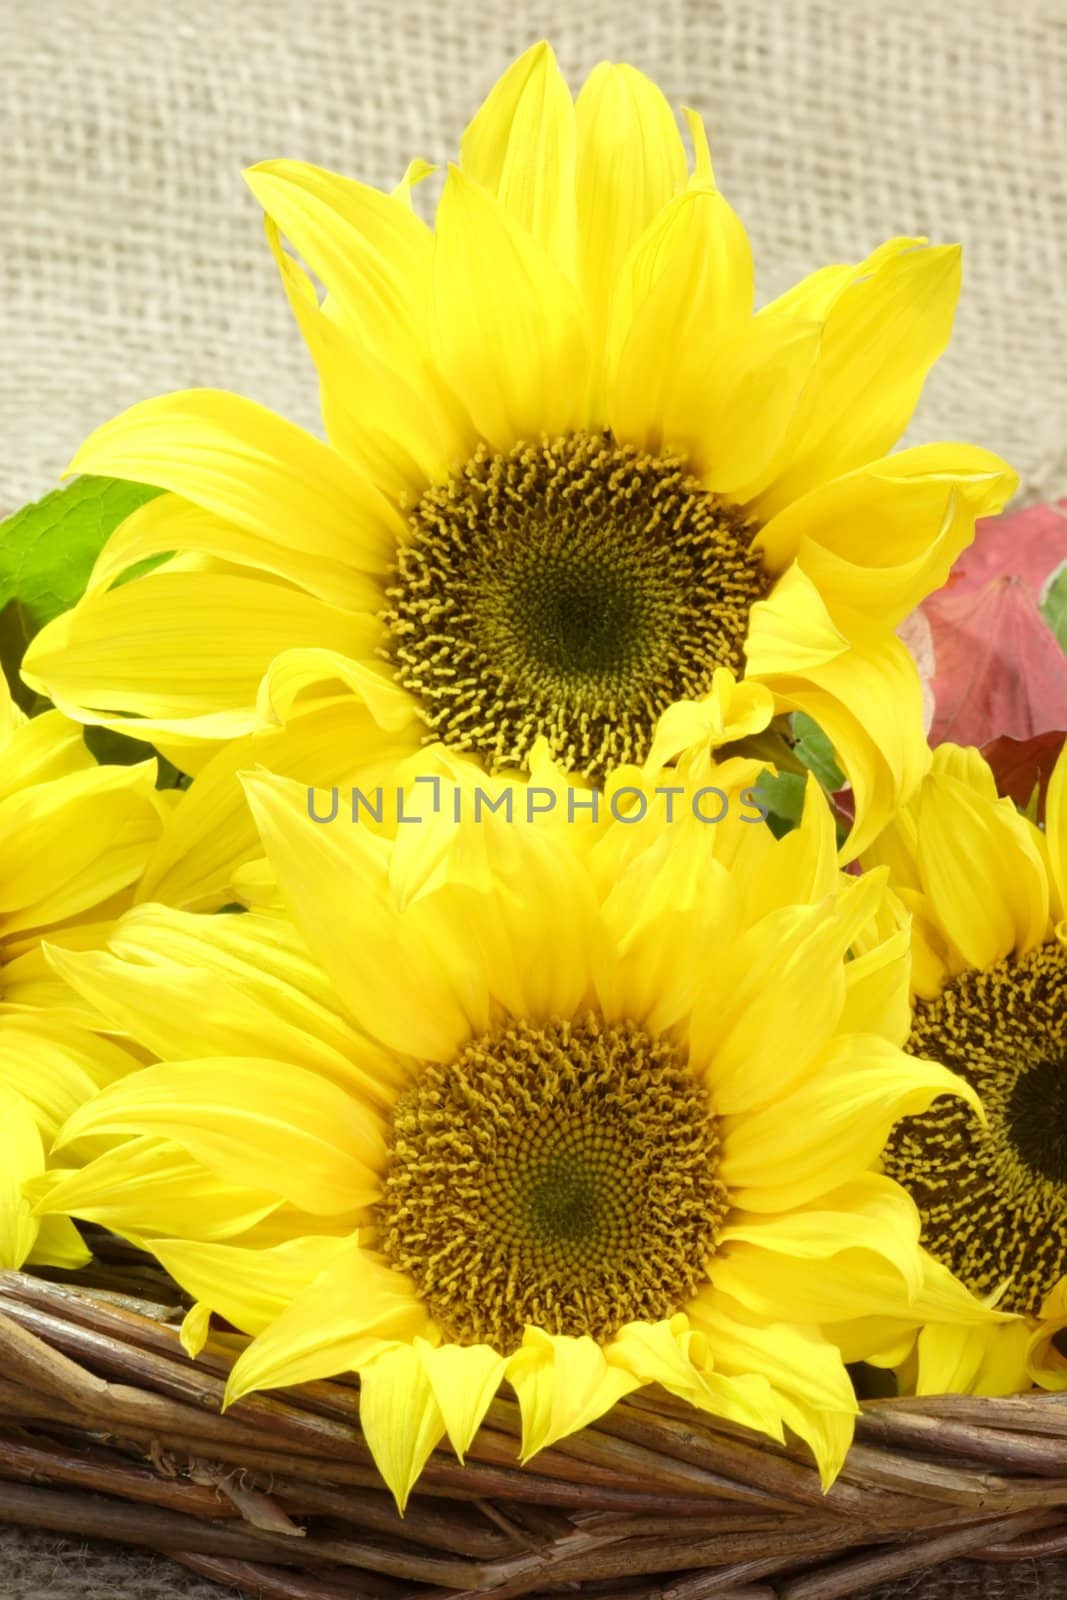 Close-up of sunflower blossoms - shot in studio